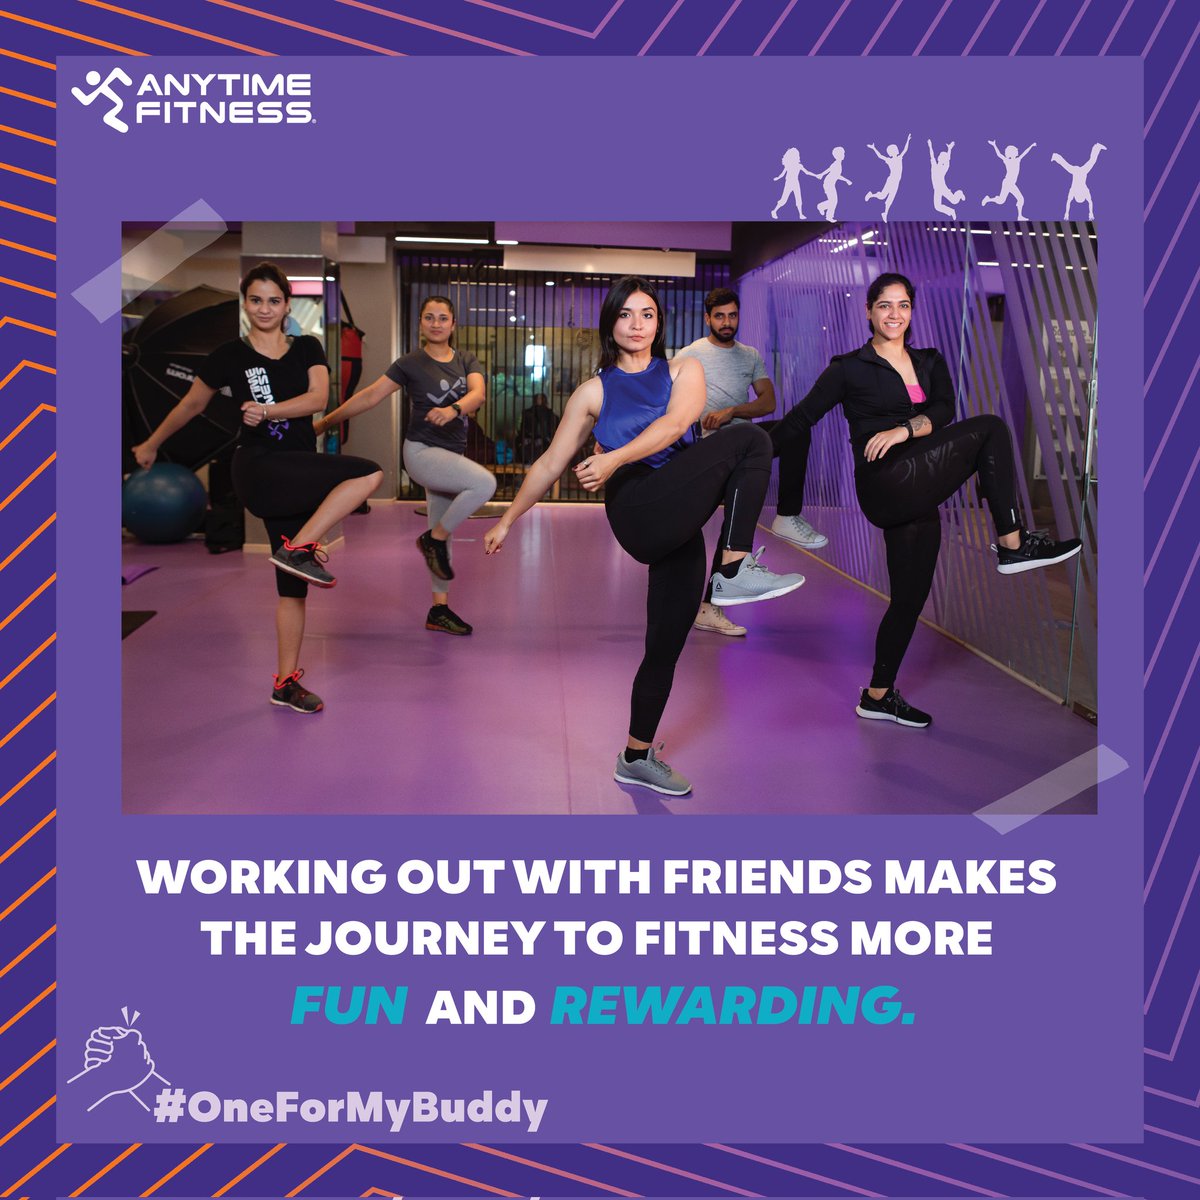 One for my Buddy
Friends make fitness fun! Agree?

#AnytimeFitness #AnytimeFitnessIndia #OneForMyBuddy #FriendshipDay #FriendshipDay2023 #Fitness #Health'